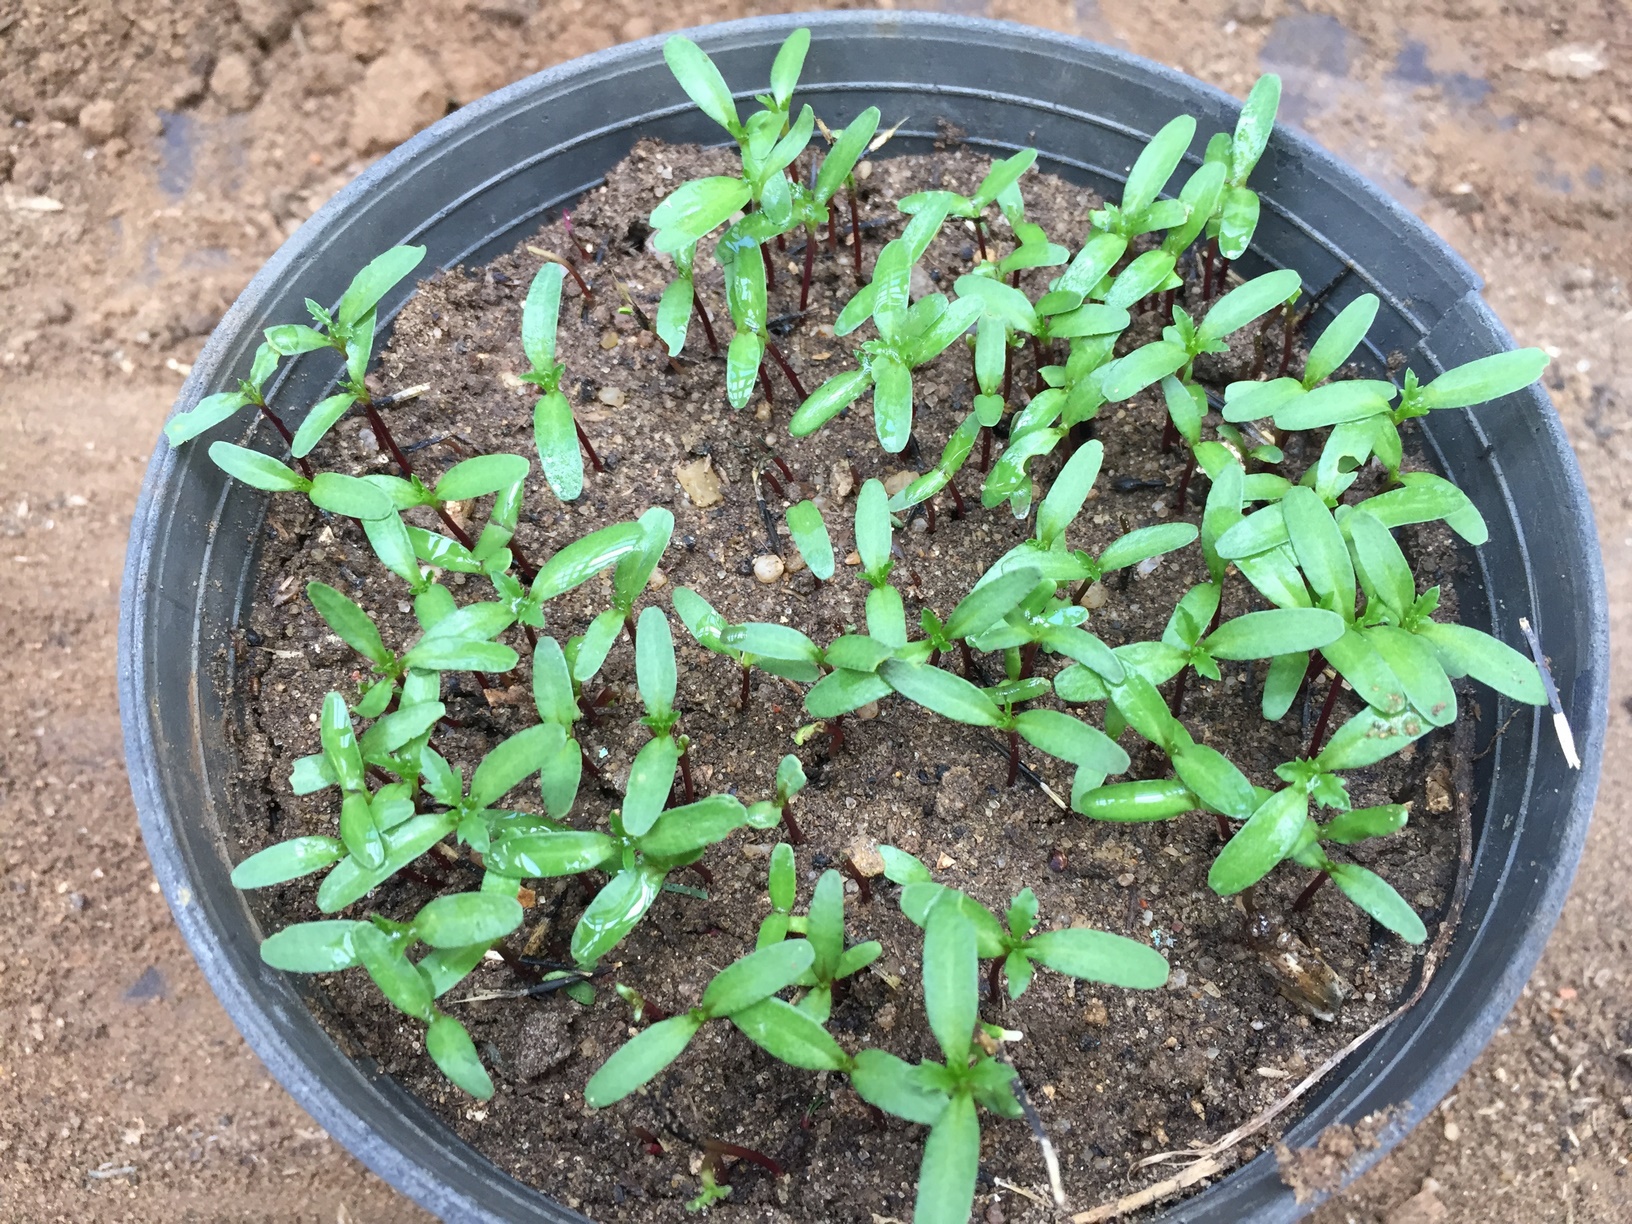 Typically, marigolds will take three to four days to germinate, but may take a few days longer if the location is cooler.